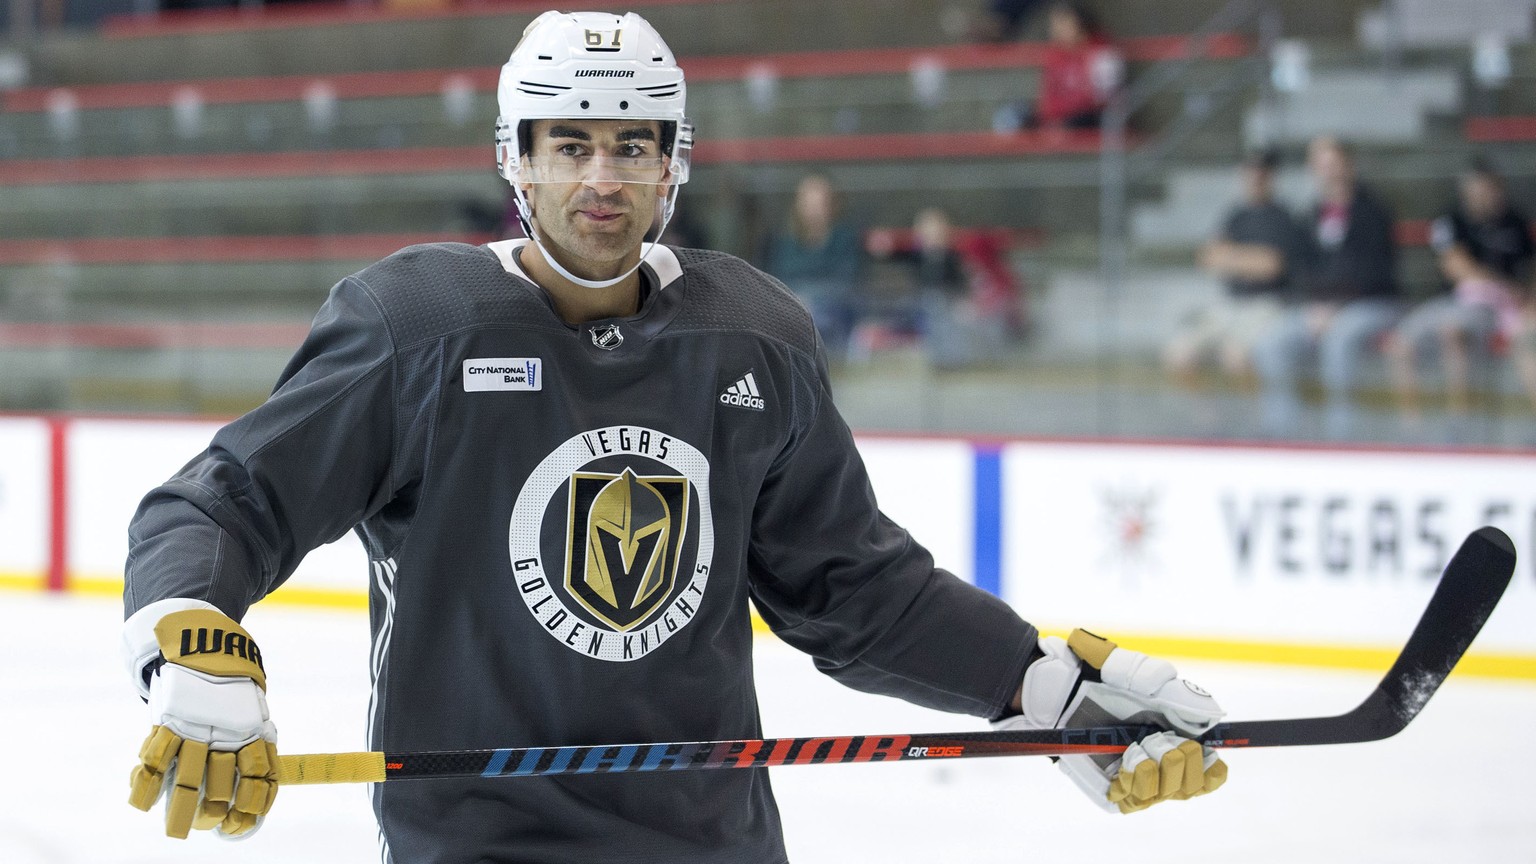 Newly acquired Vegas Golden Knights left wing Max Pacioretty (67) stands on the ice during captain&#039;s practice at City National Arena in Las Vegas on Wednesday, Sept. 12, 2018. Pacioretty was acqu ...